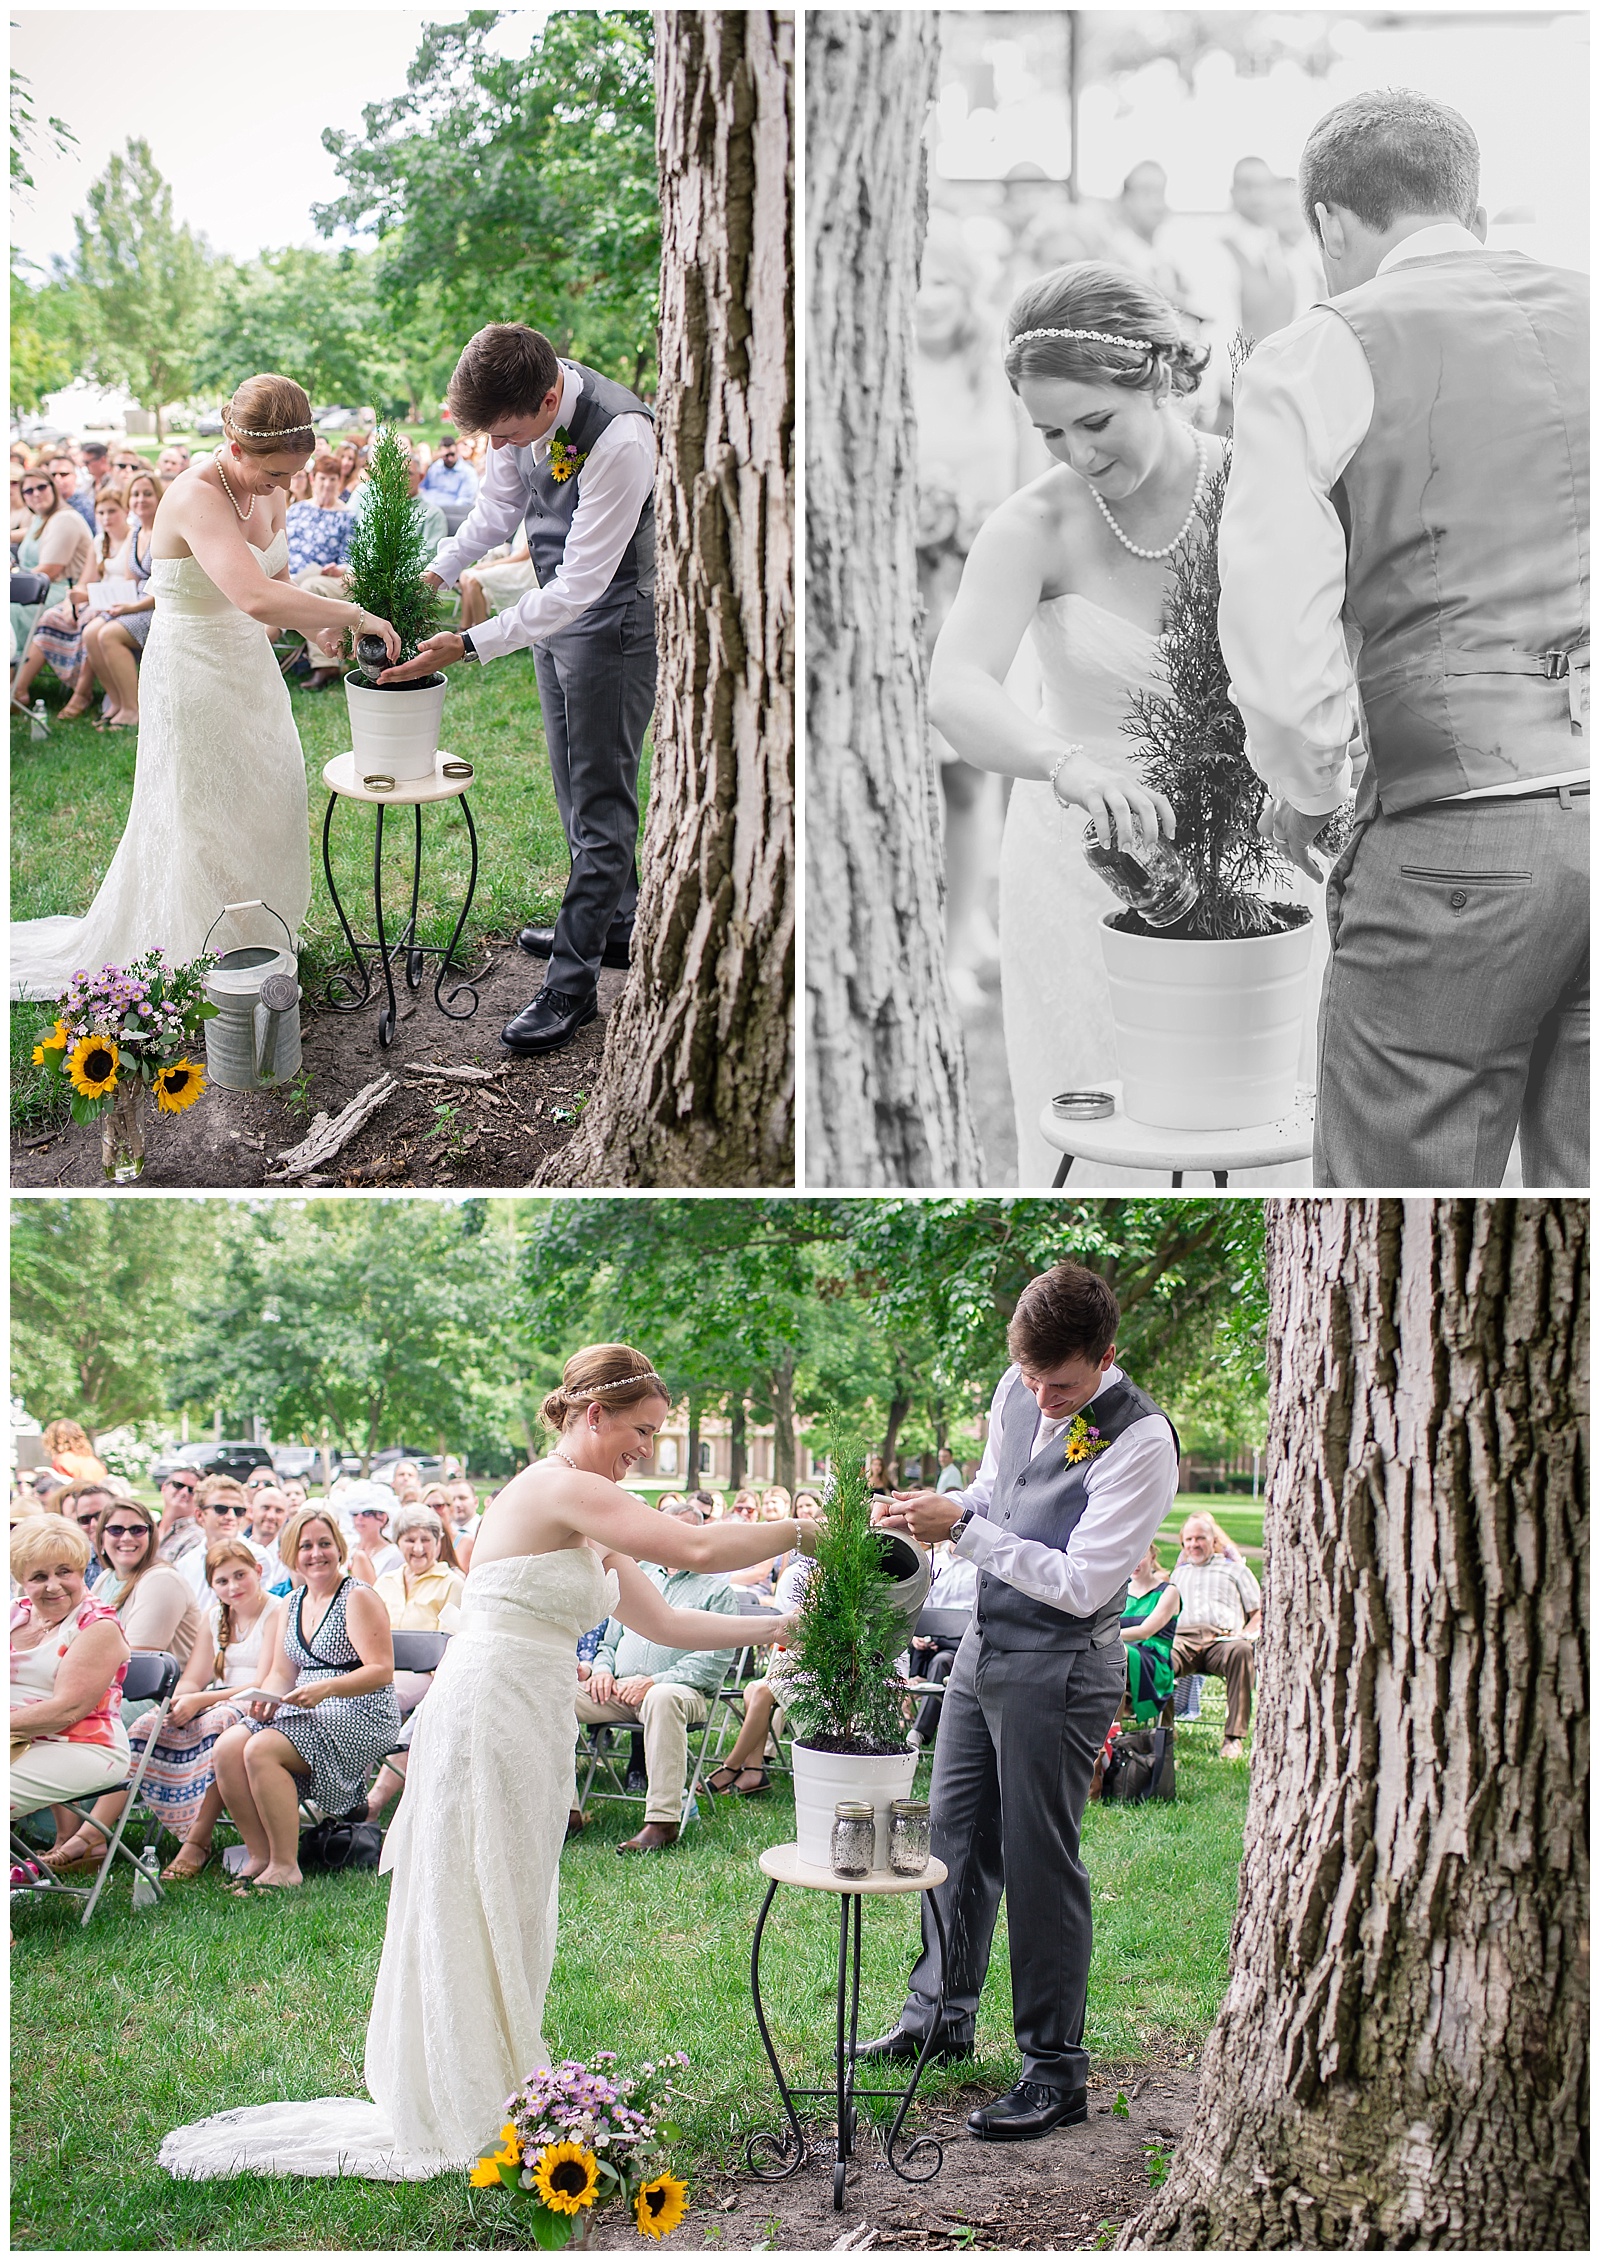 Wedding photography at South Park in Lawrence, Kansas.